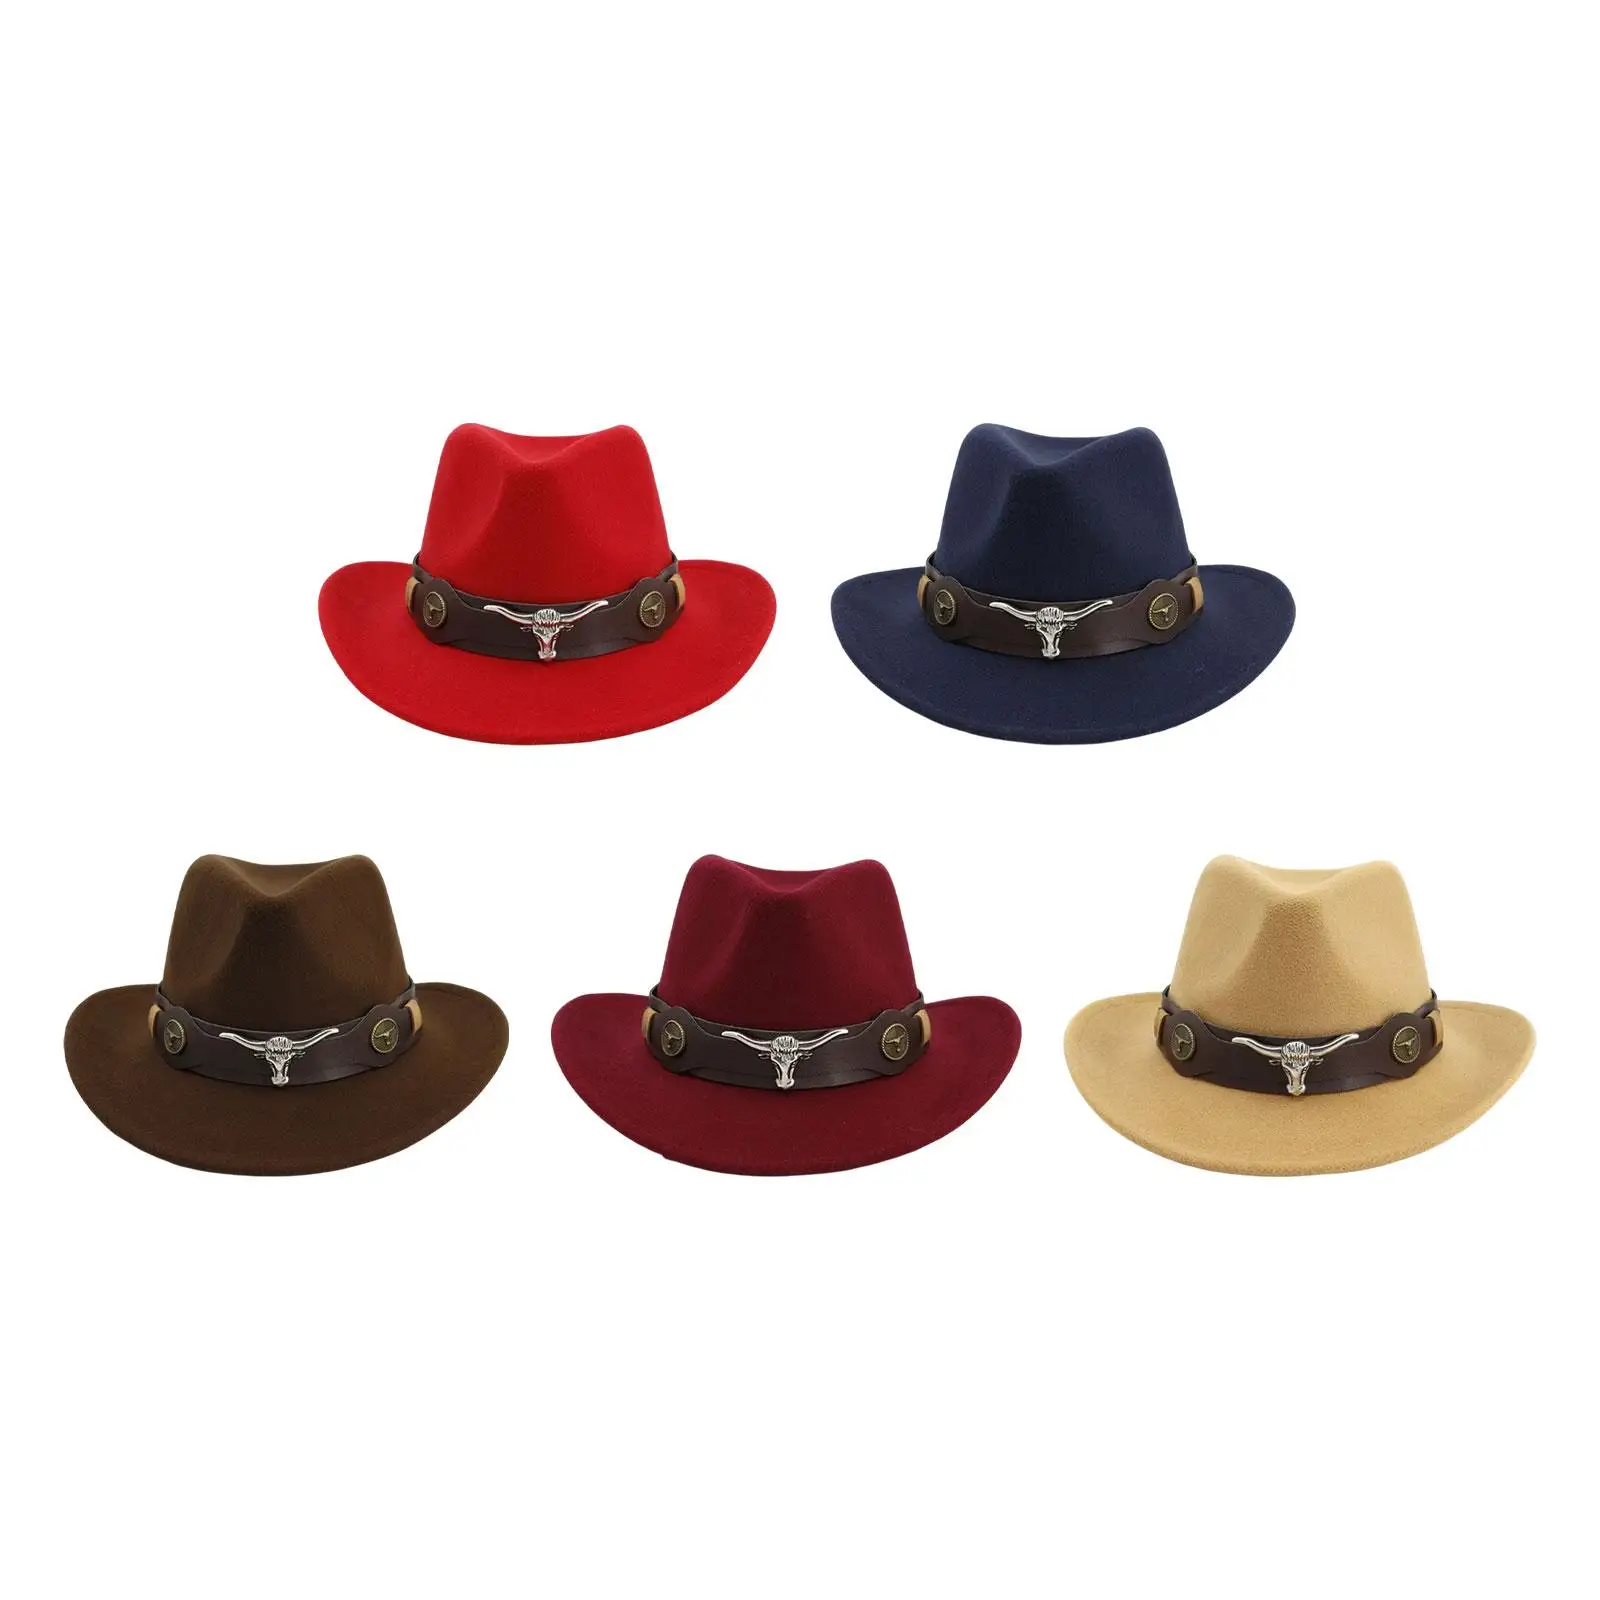 Casual Western Cowboy Hat, Costume Props Wide Brim Comfortable Lightweight Cosplay Cowgirl Hat for Men Party Stage Performance